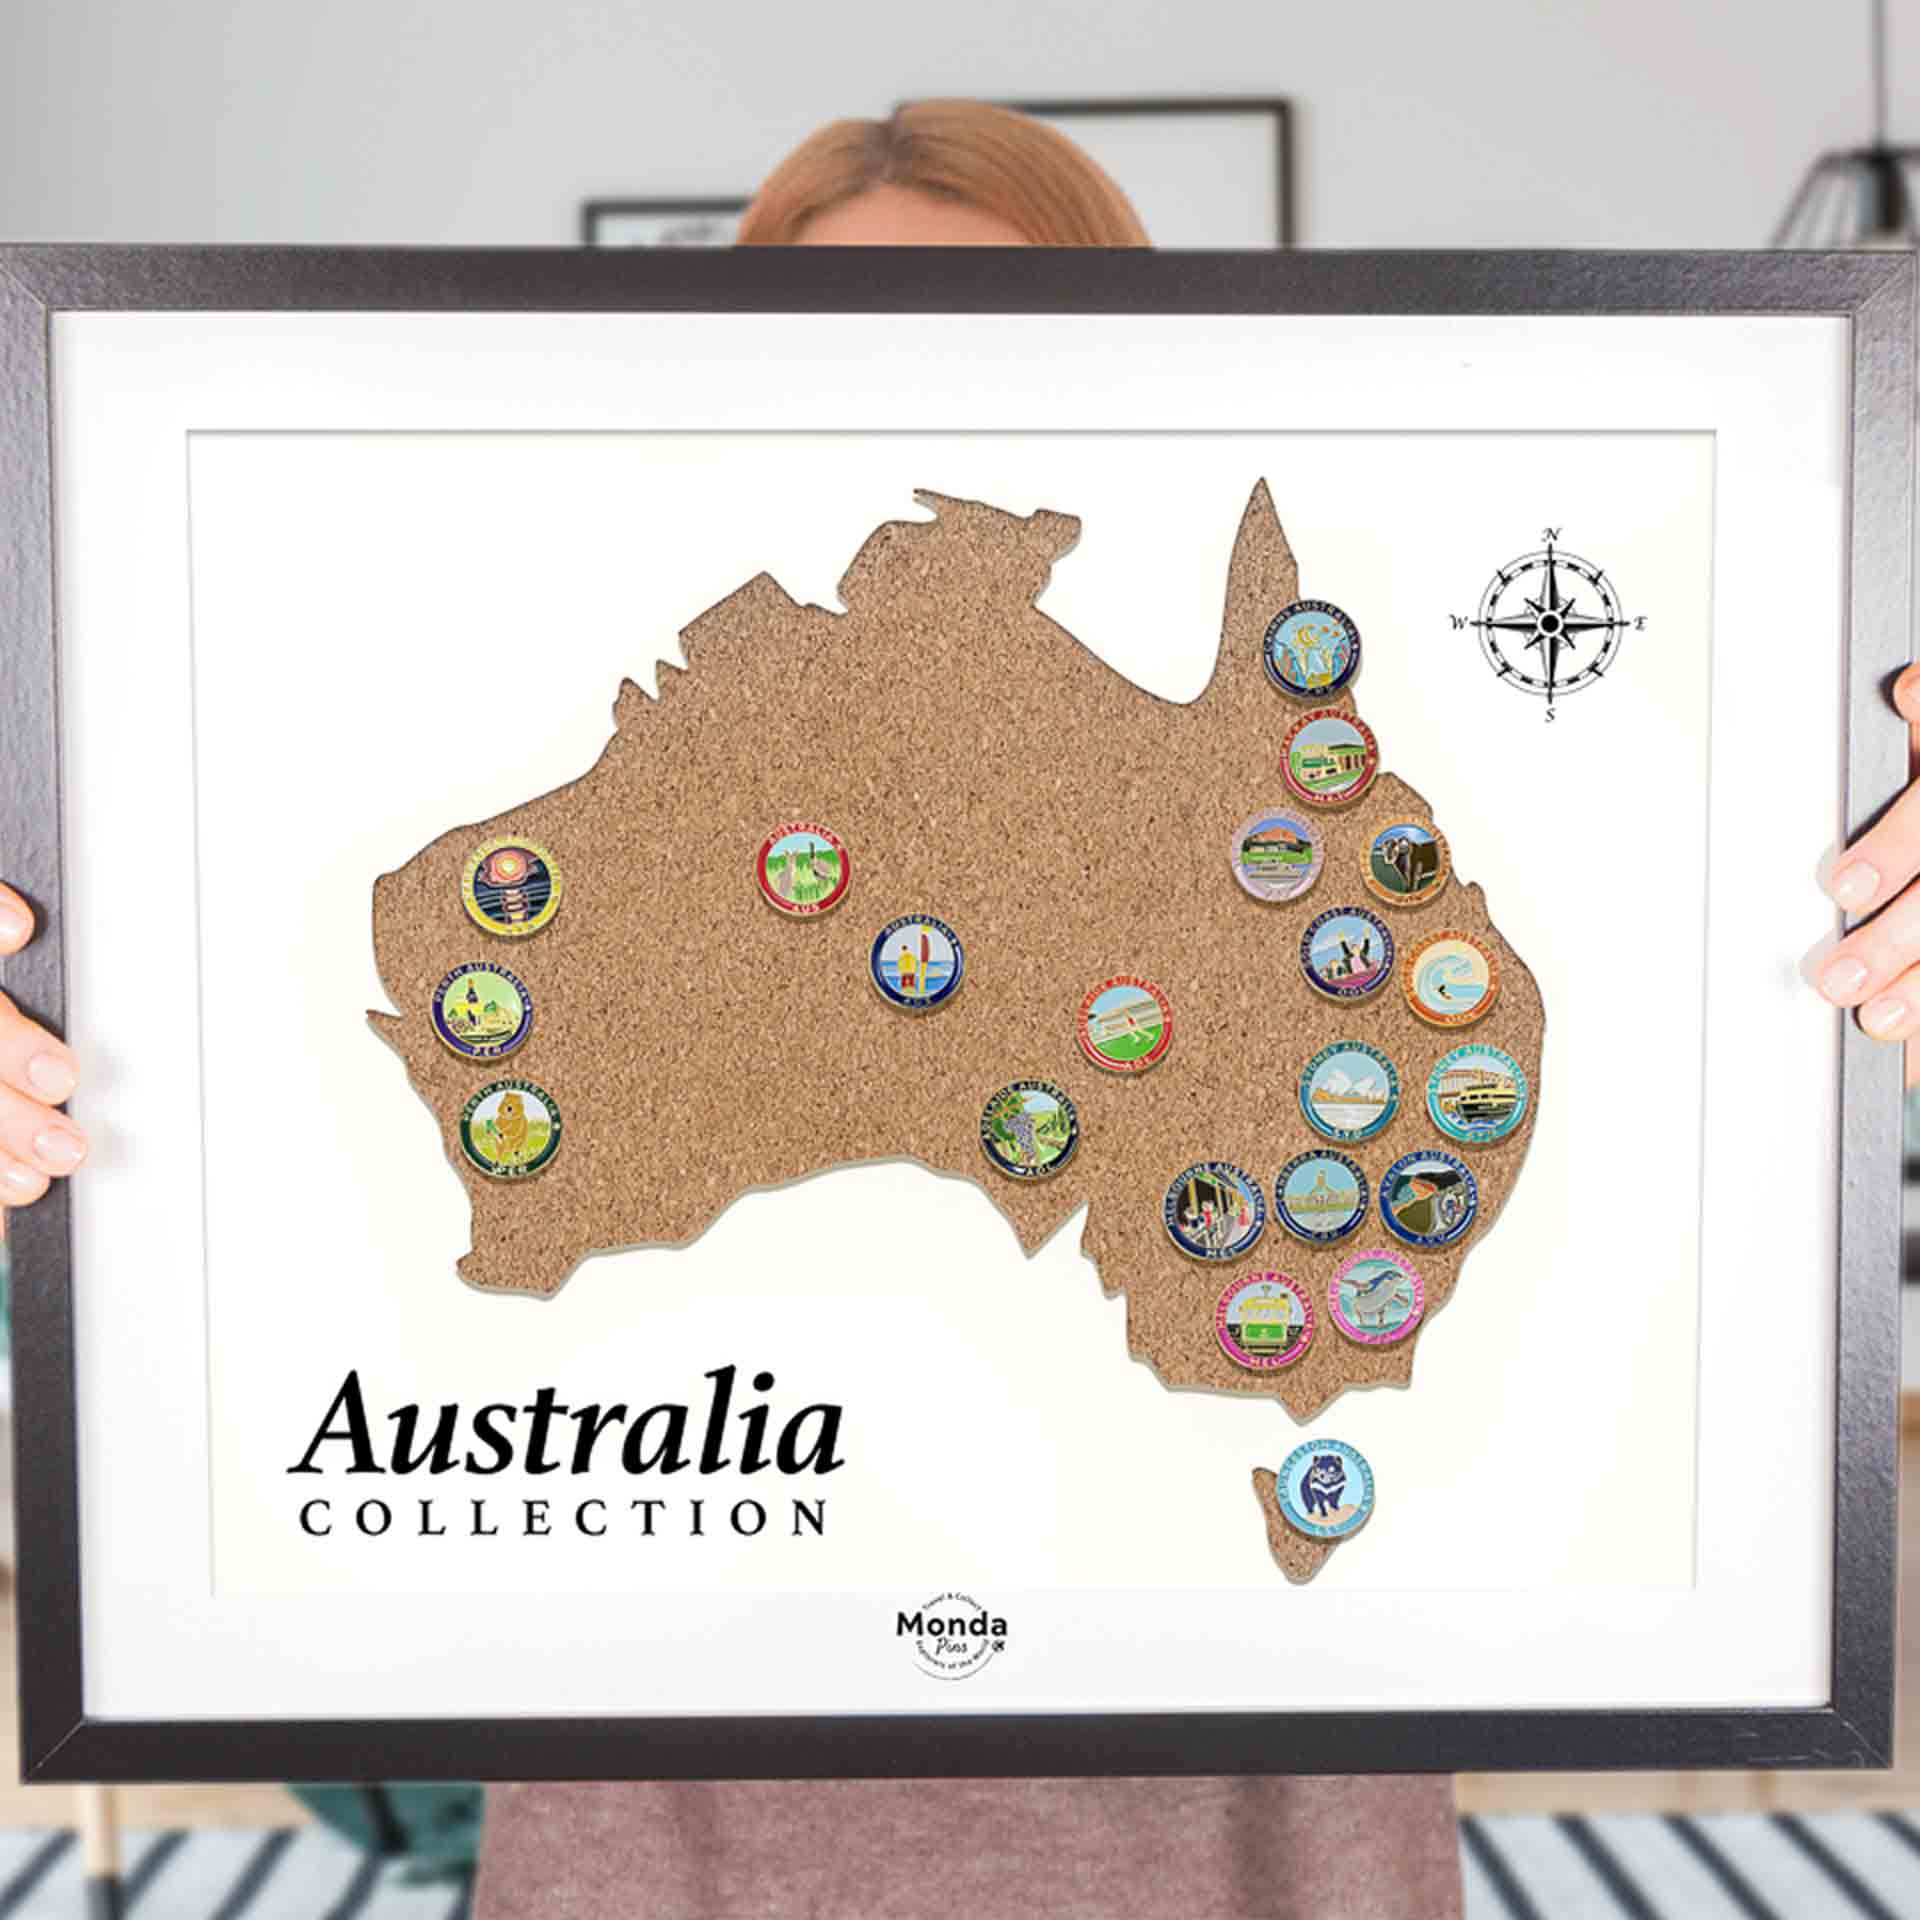 Adelaide Oval Adelaide Australia Travel Pin Collection